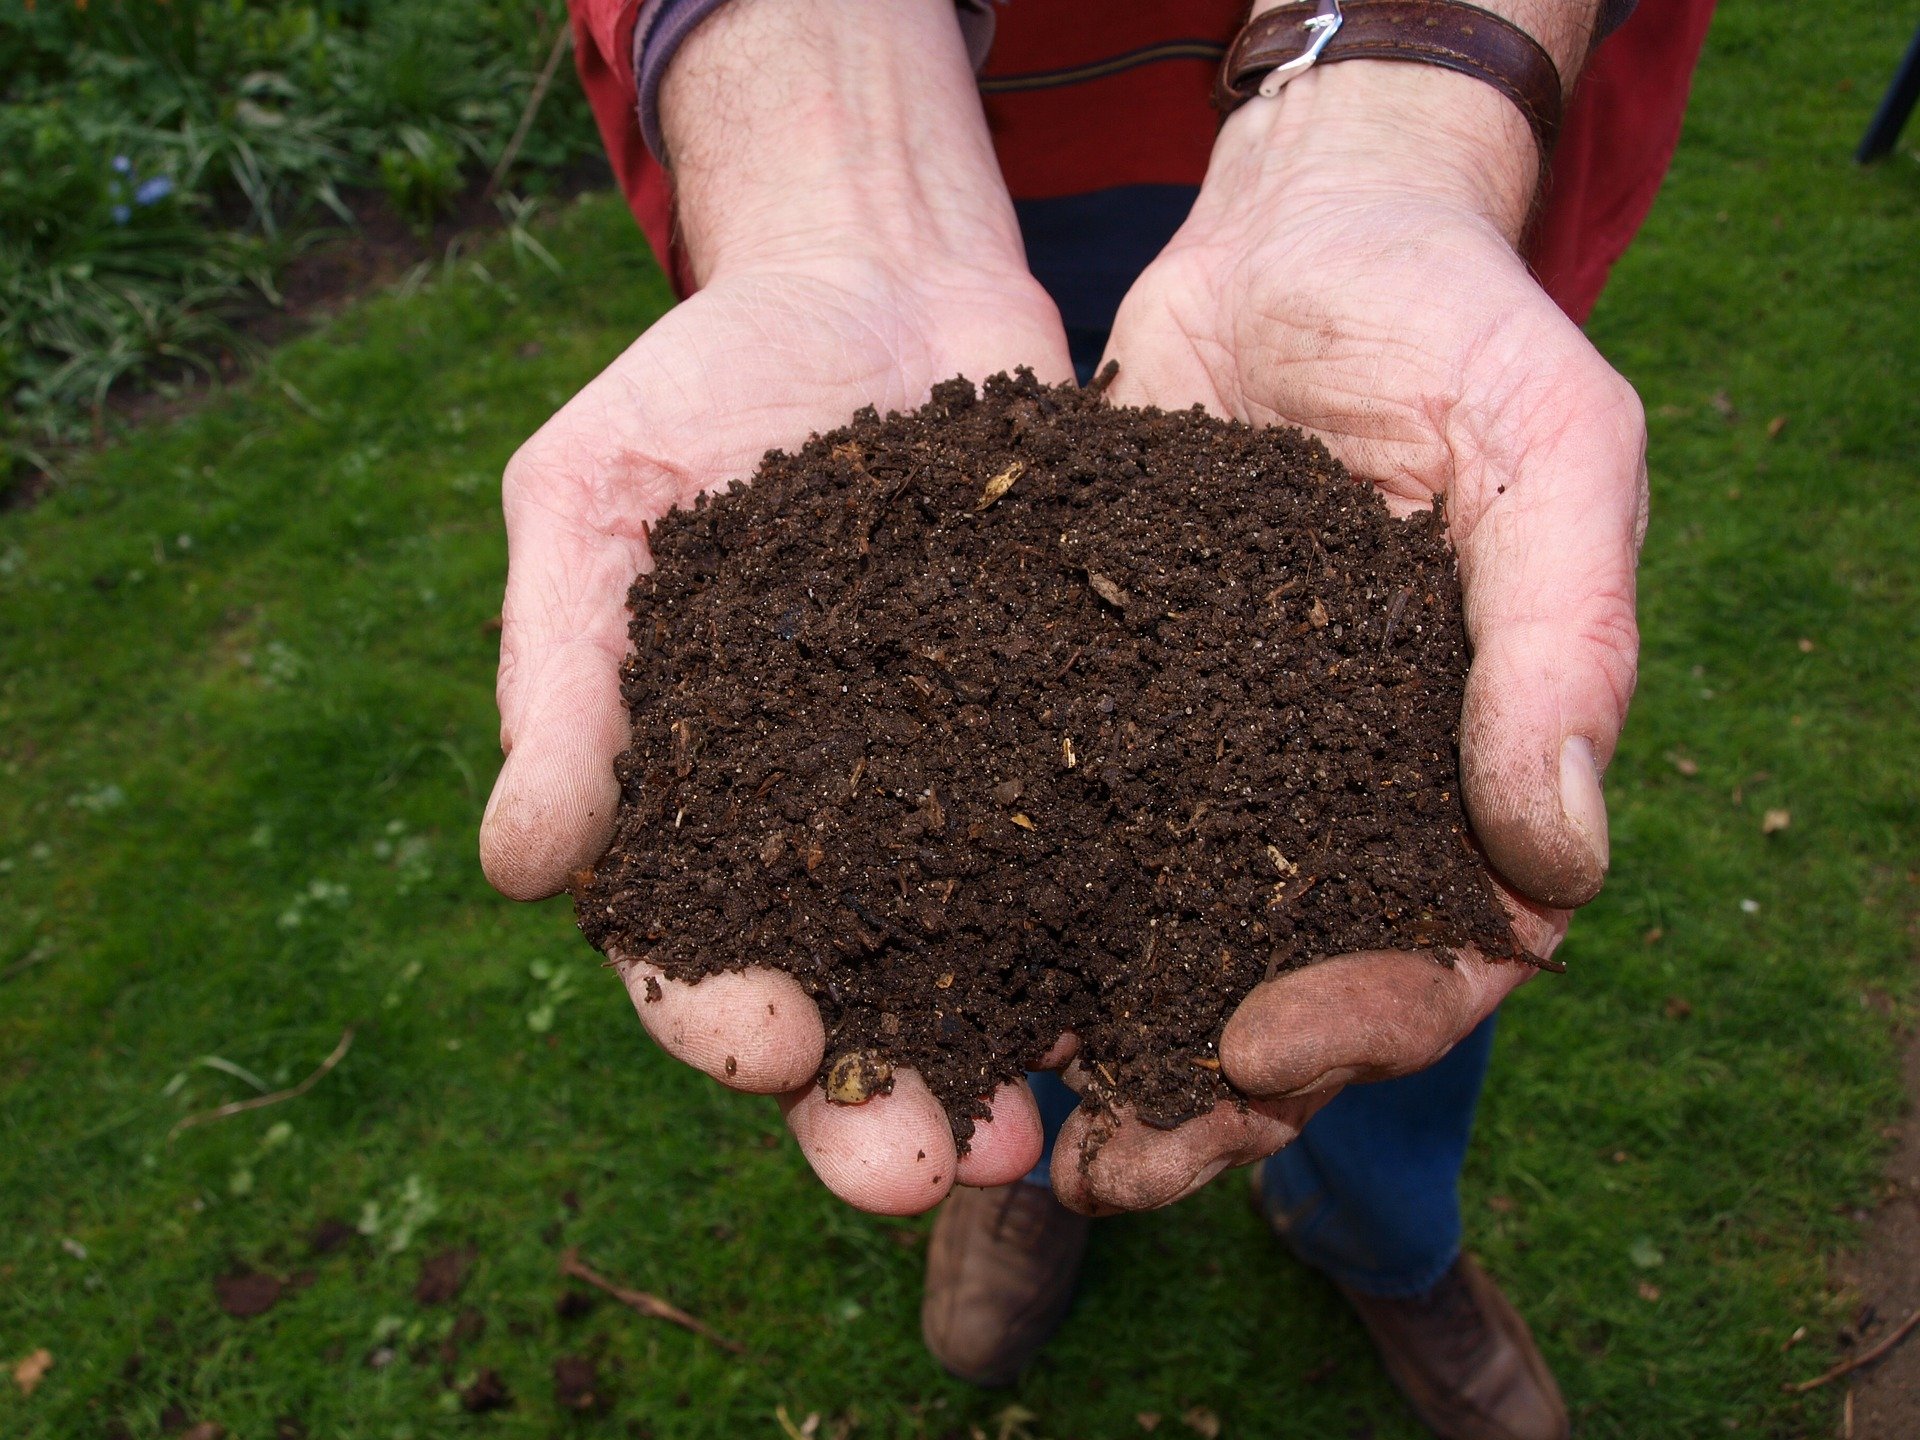 INFO | Some interesting information about garden waste and composting in Herefordshire